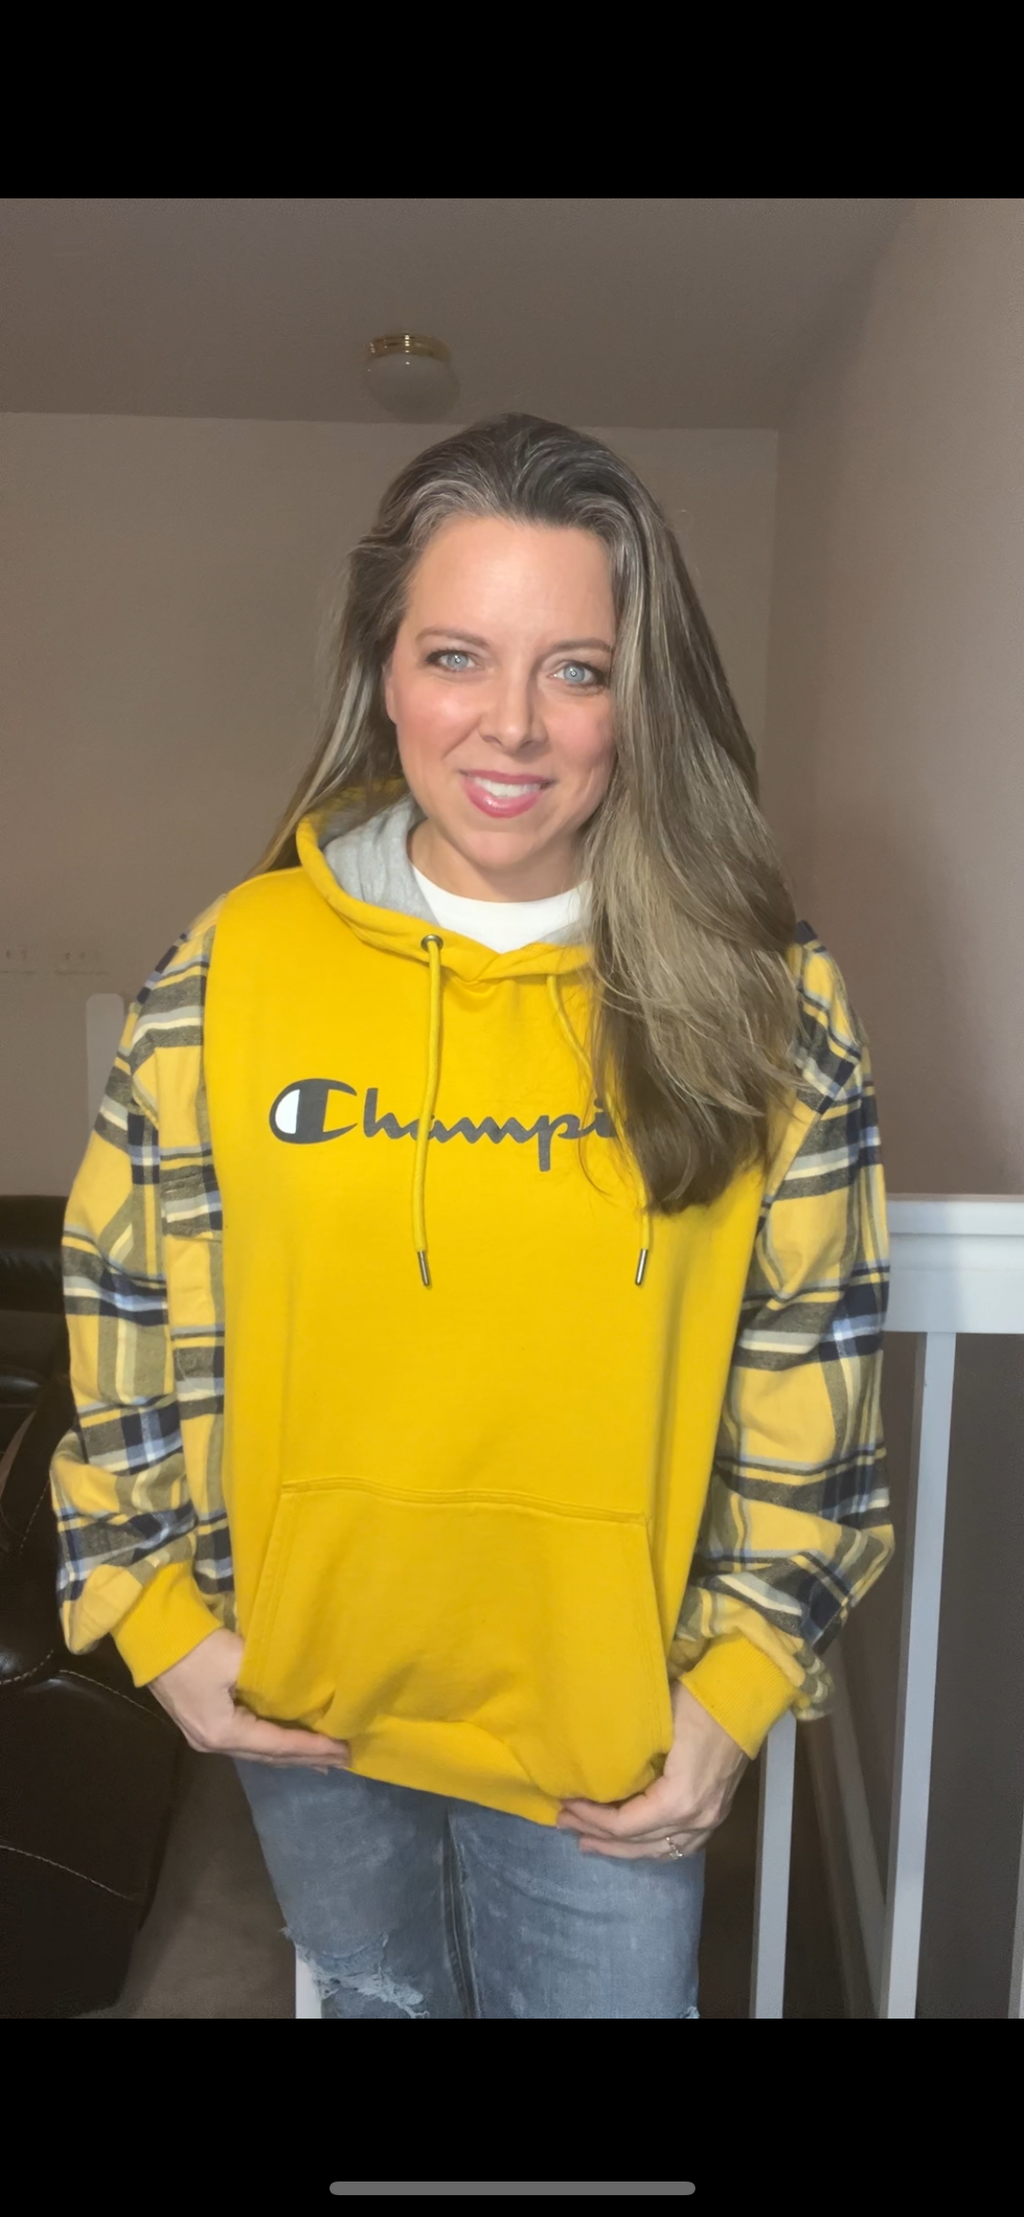 Upcycled Yellow champion – women’s XL – midweight sweatshirt with flannel sleeves￼